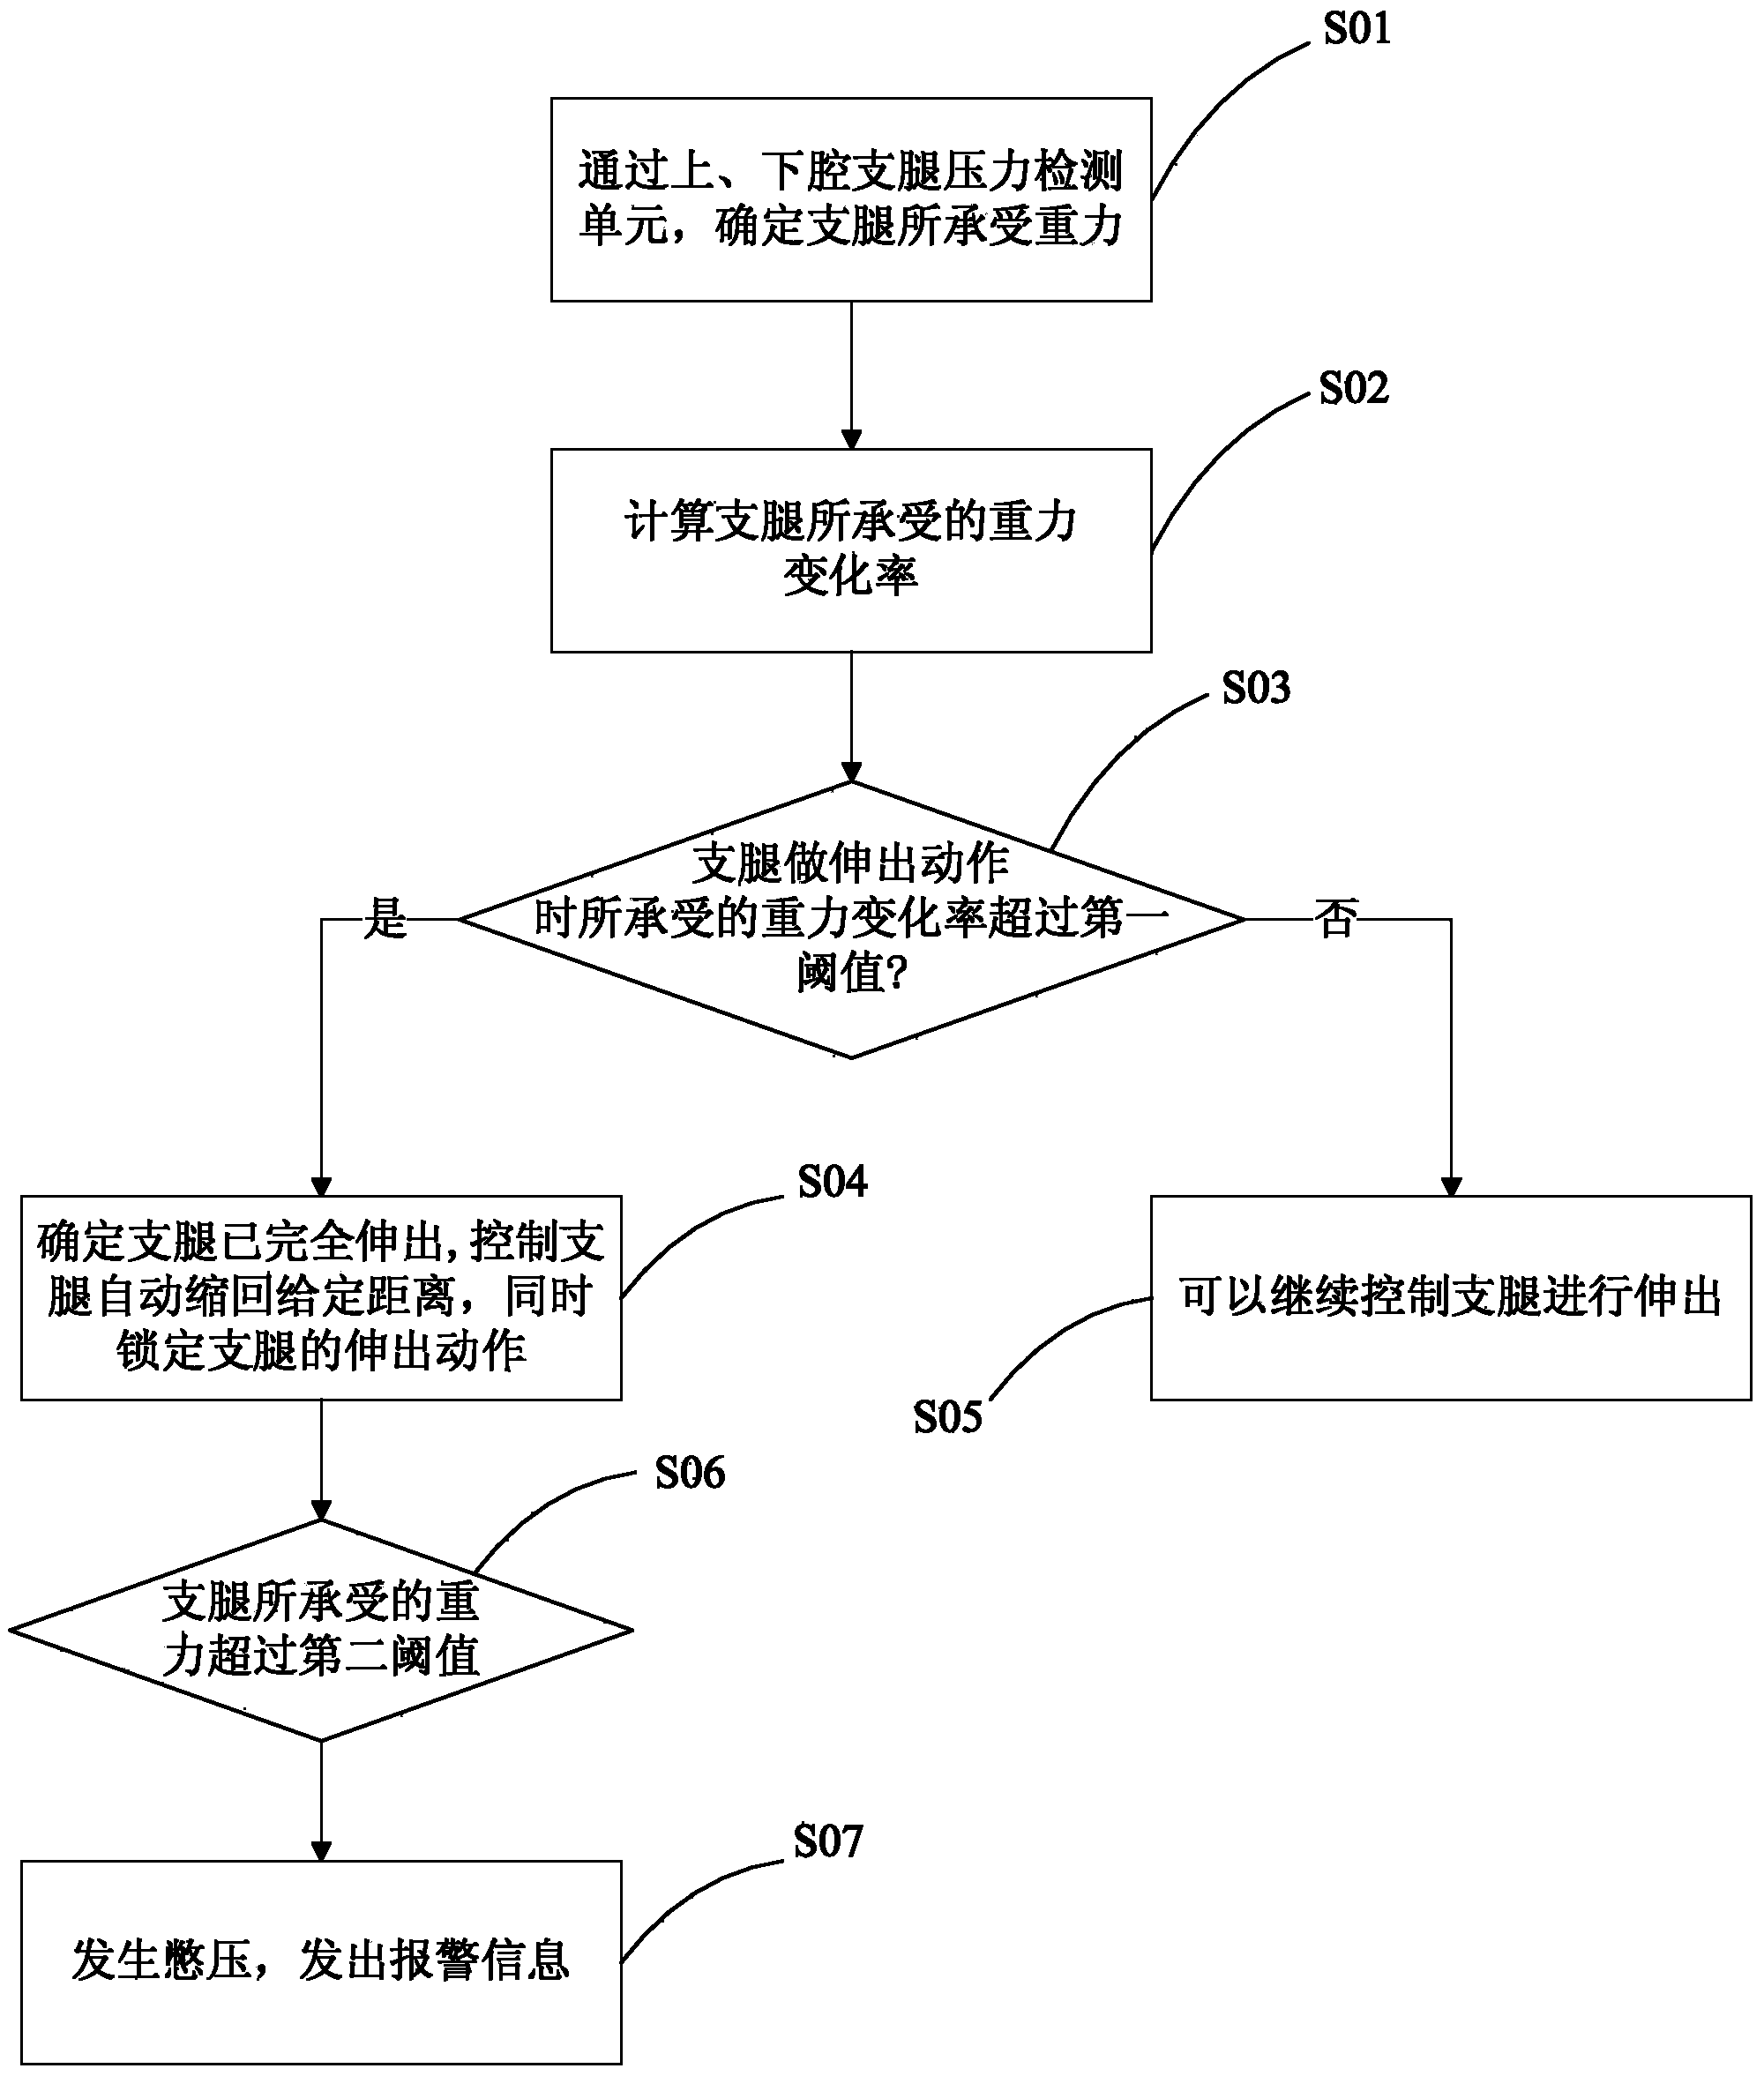 Supporting leg extension control method, controller and control system, and crane